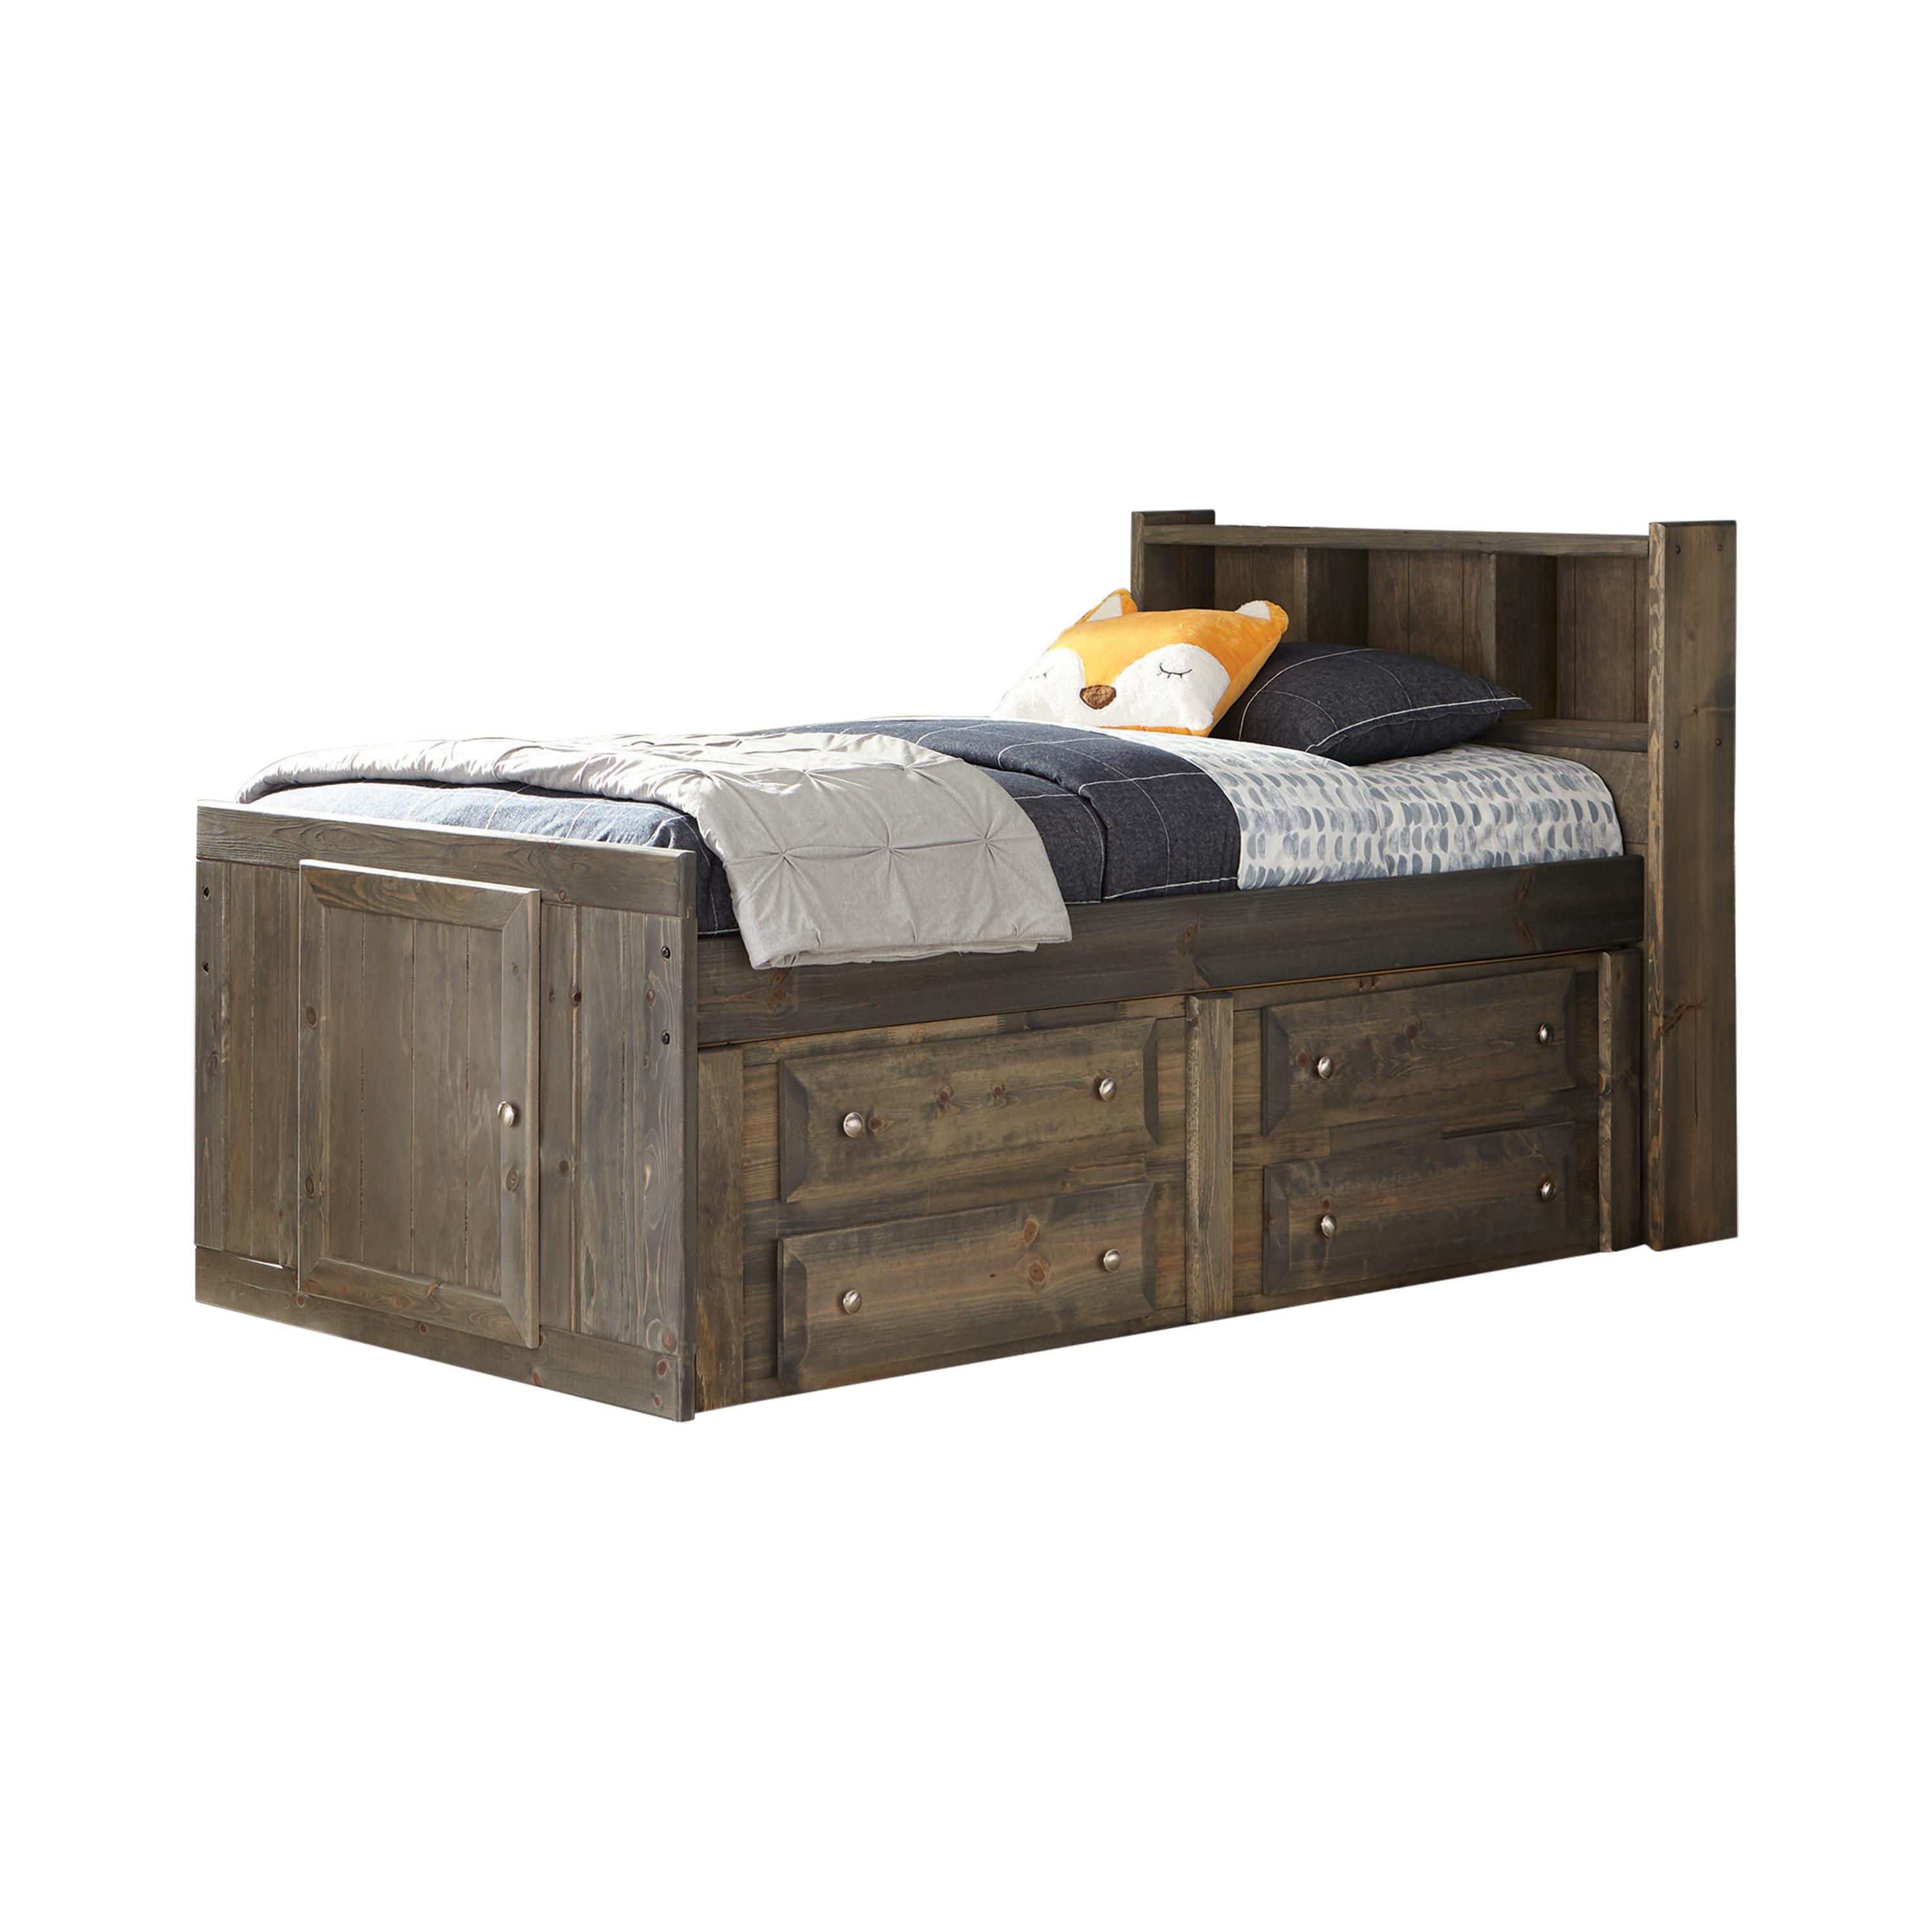 Transitional Storage Bed 400839T Wrangle Hill 400839T in Gunsmoke 